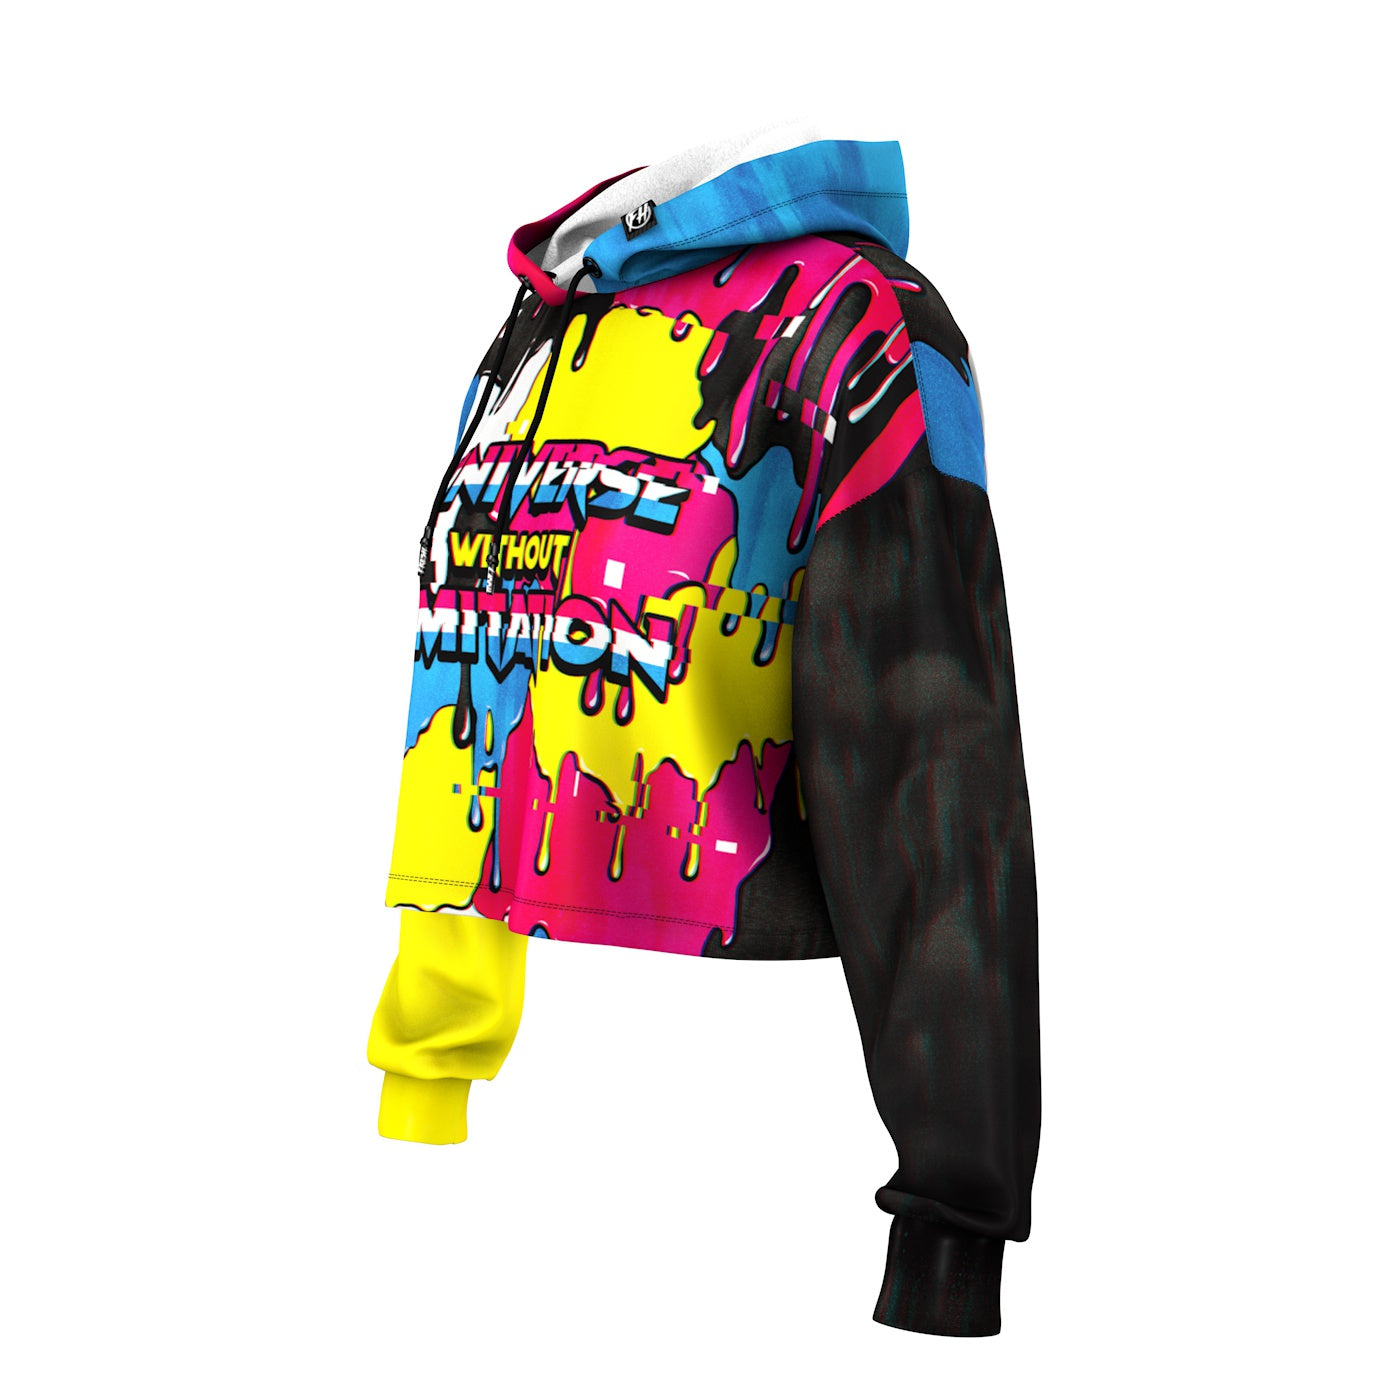 Universe Without Limitation Cropped Hoodie